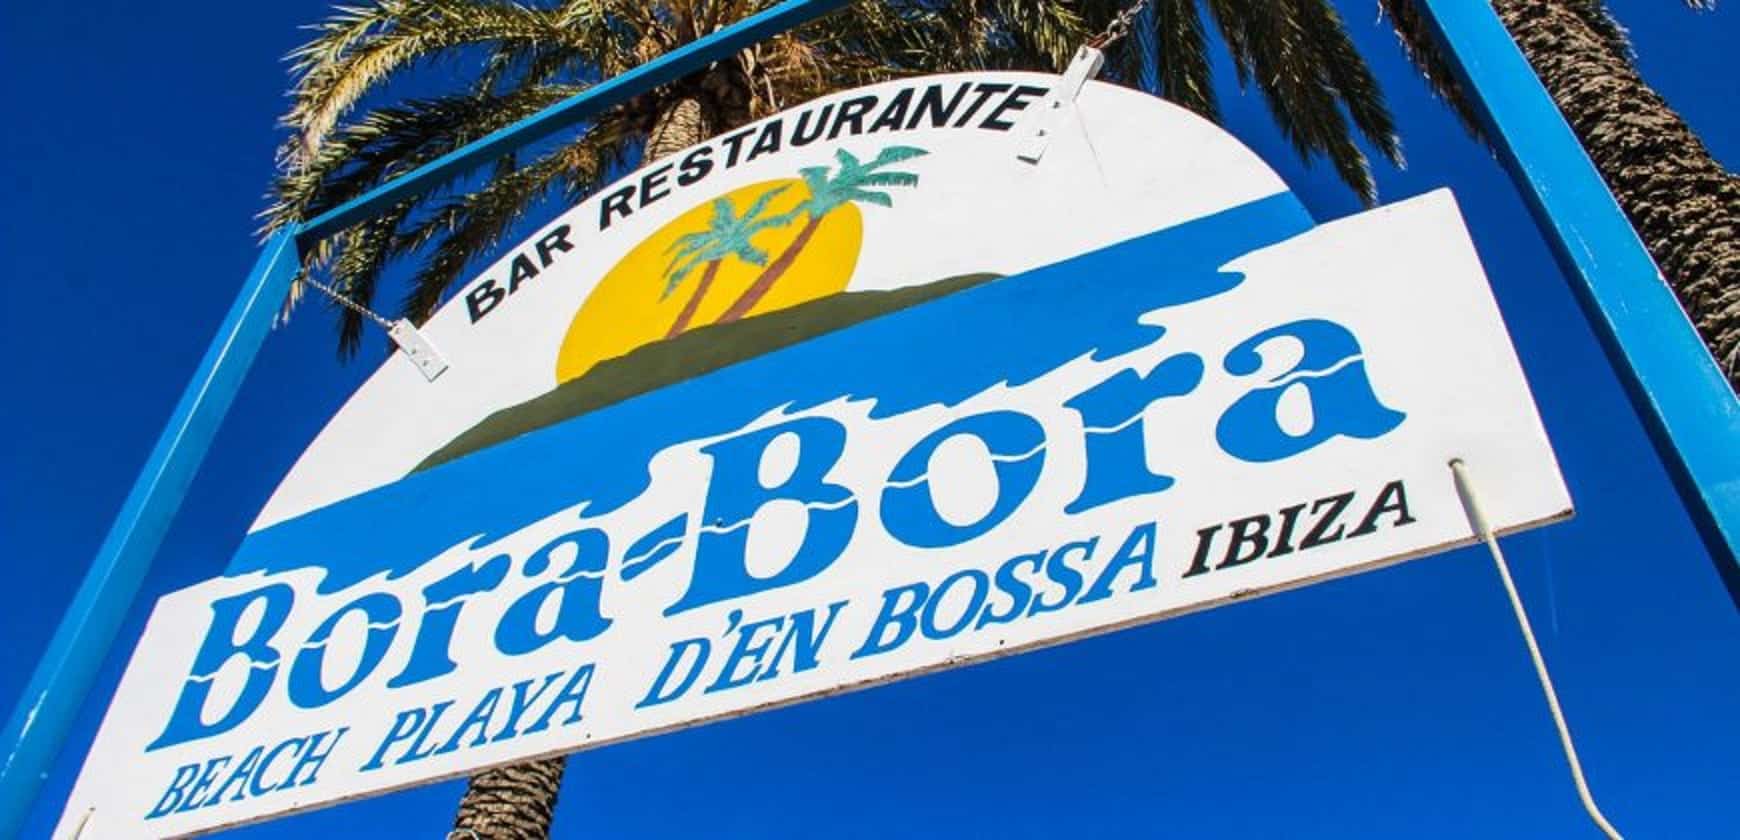 Bora Bora club to shut after 40 years of parties in Ibiza